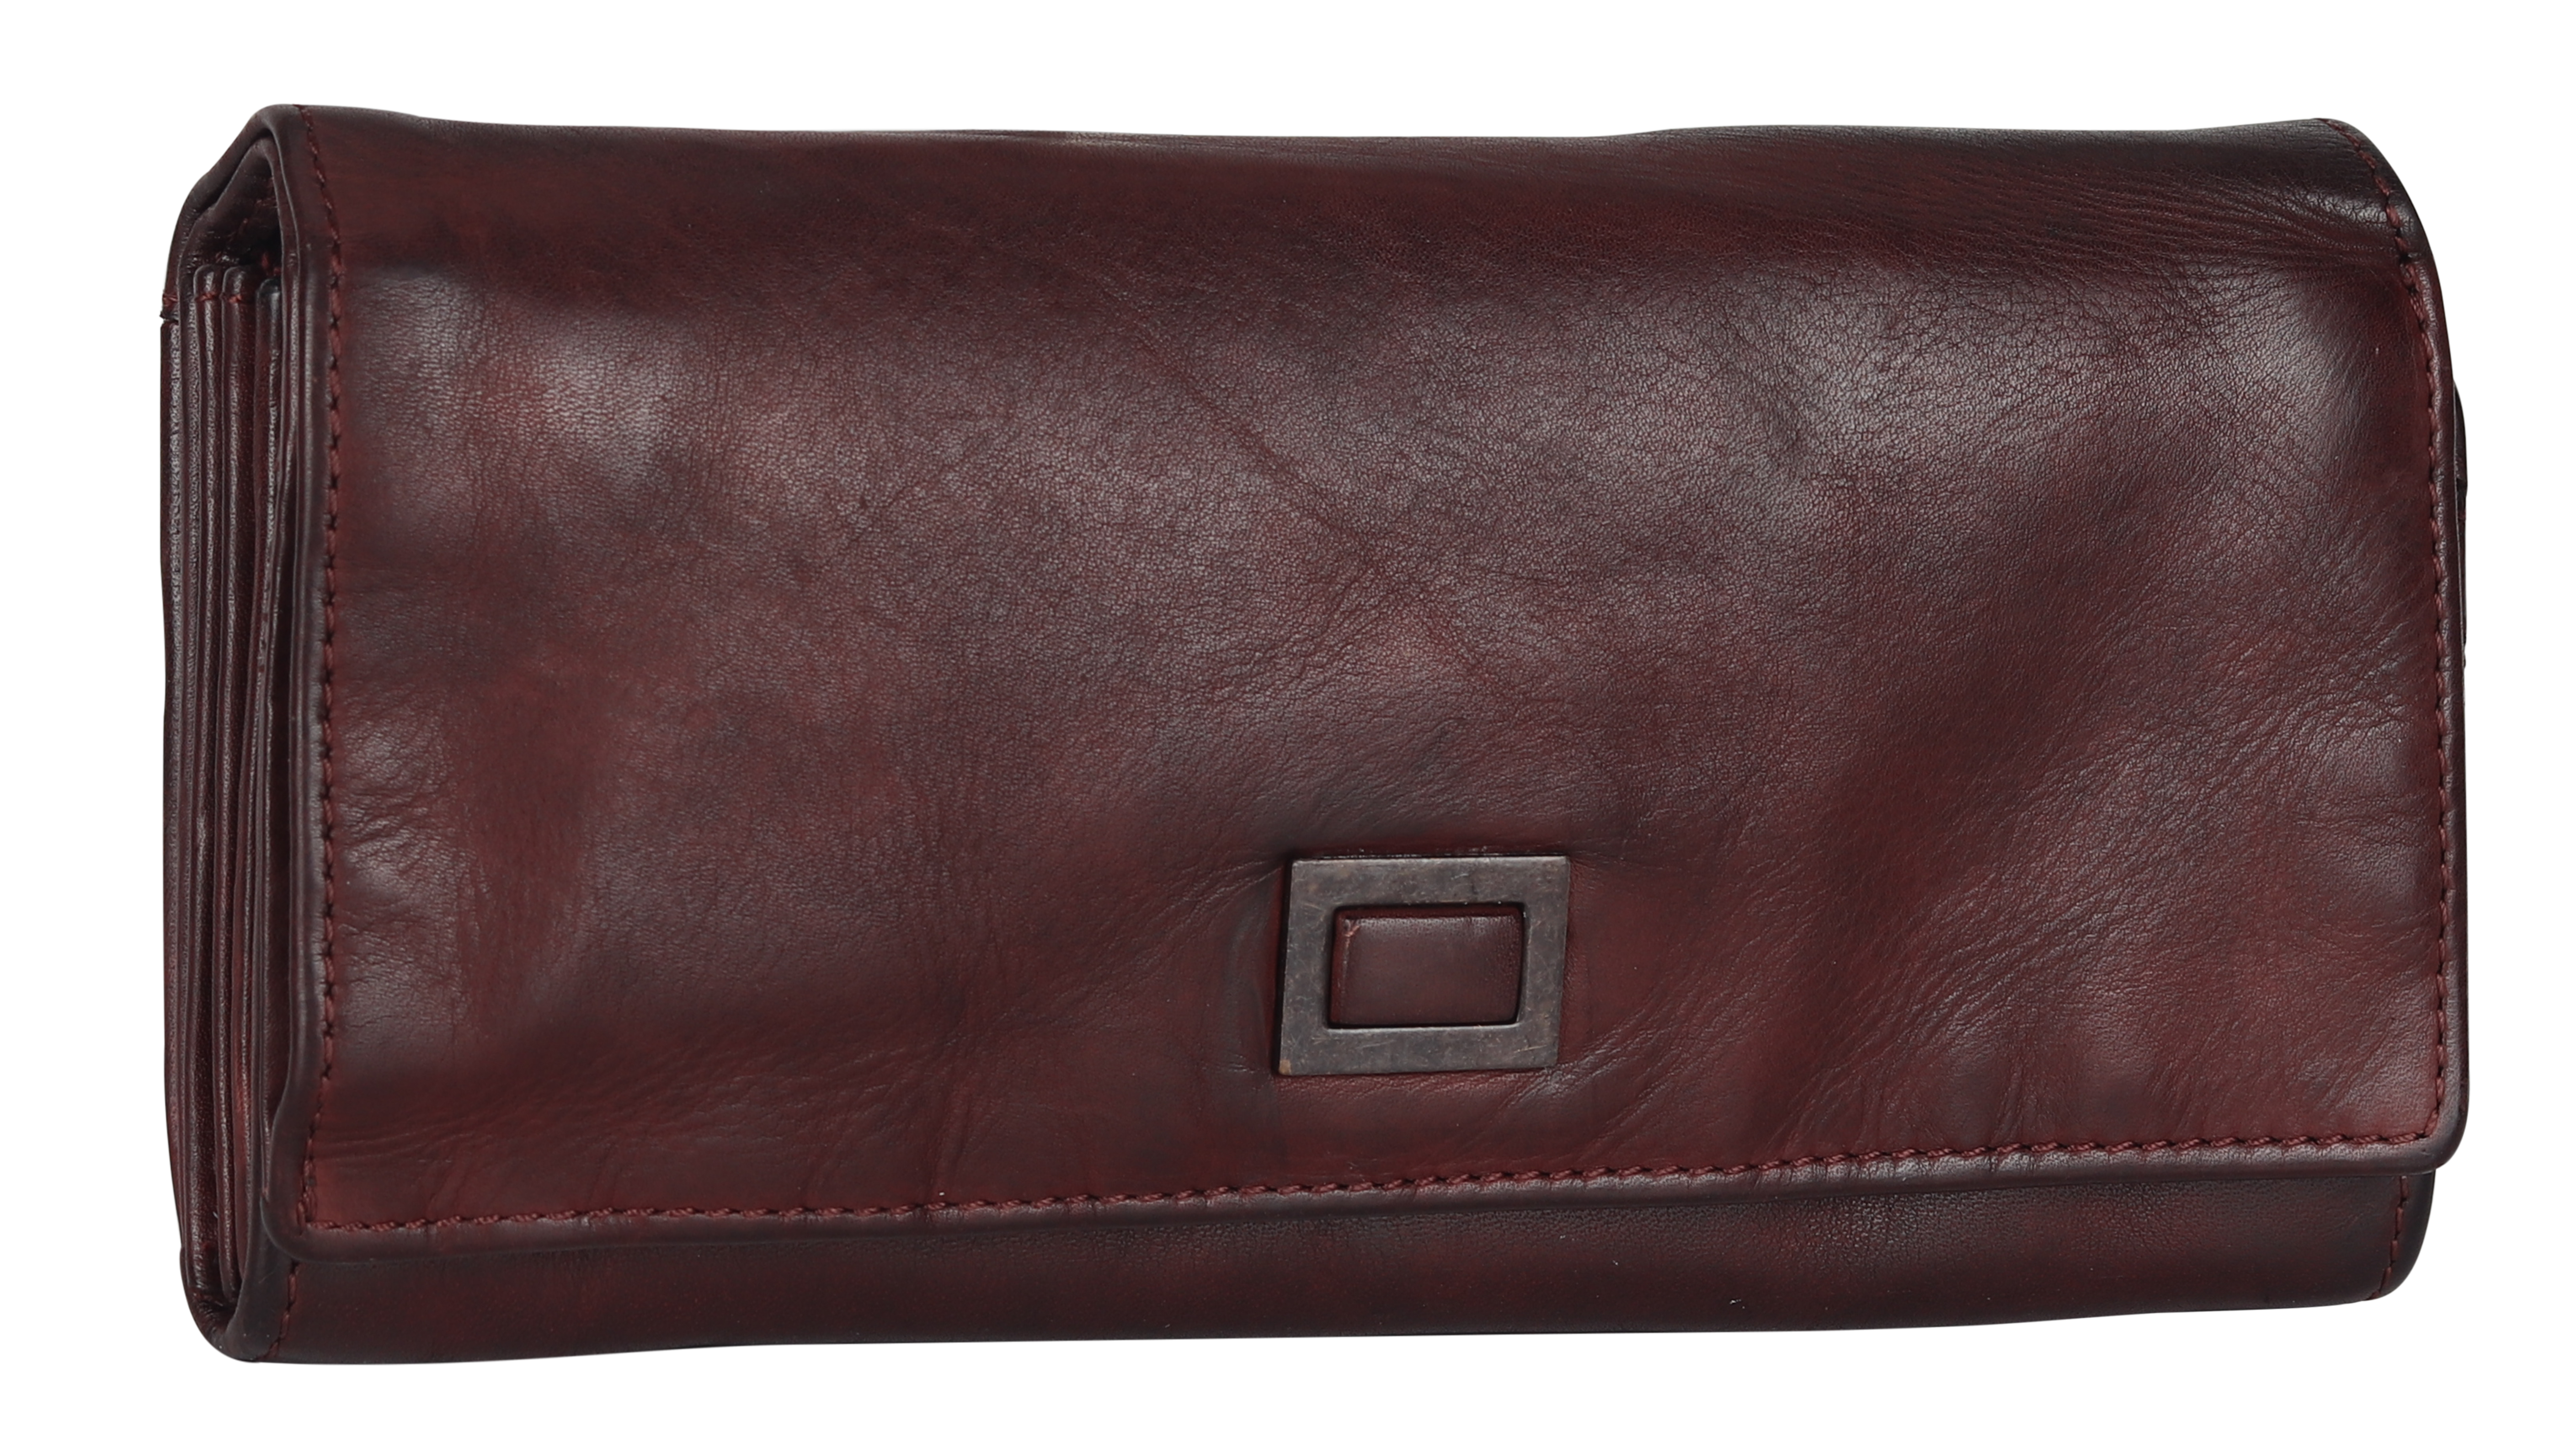 BOL Women's Square Tab Leather Wallet